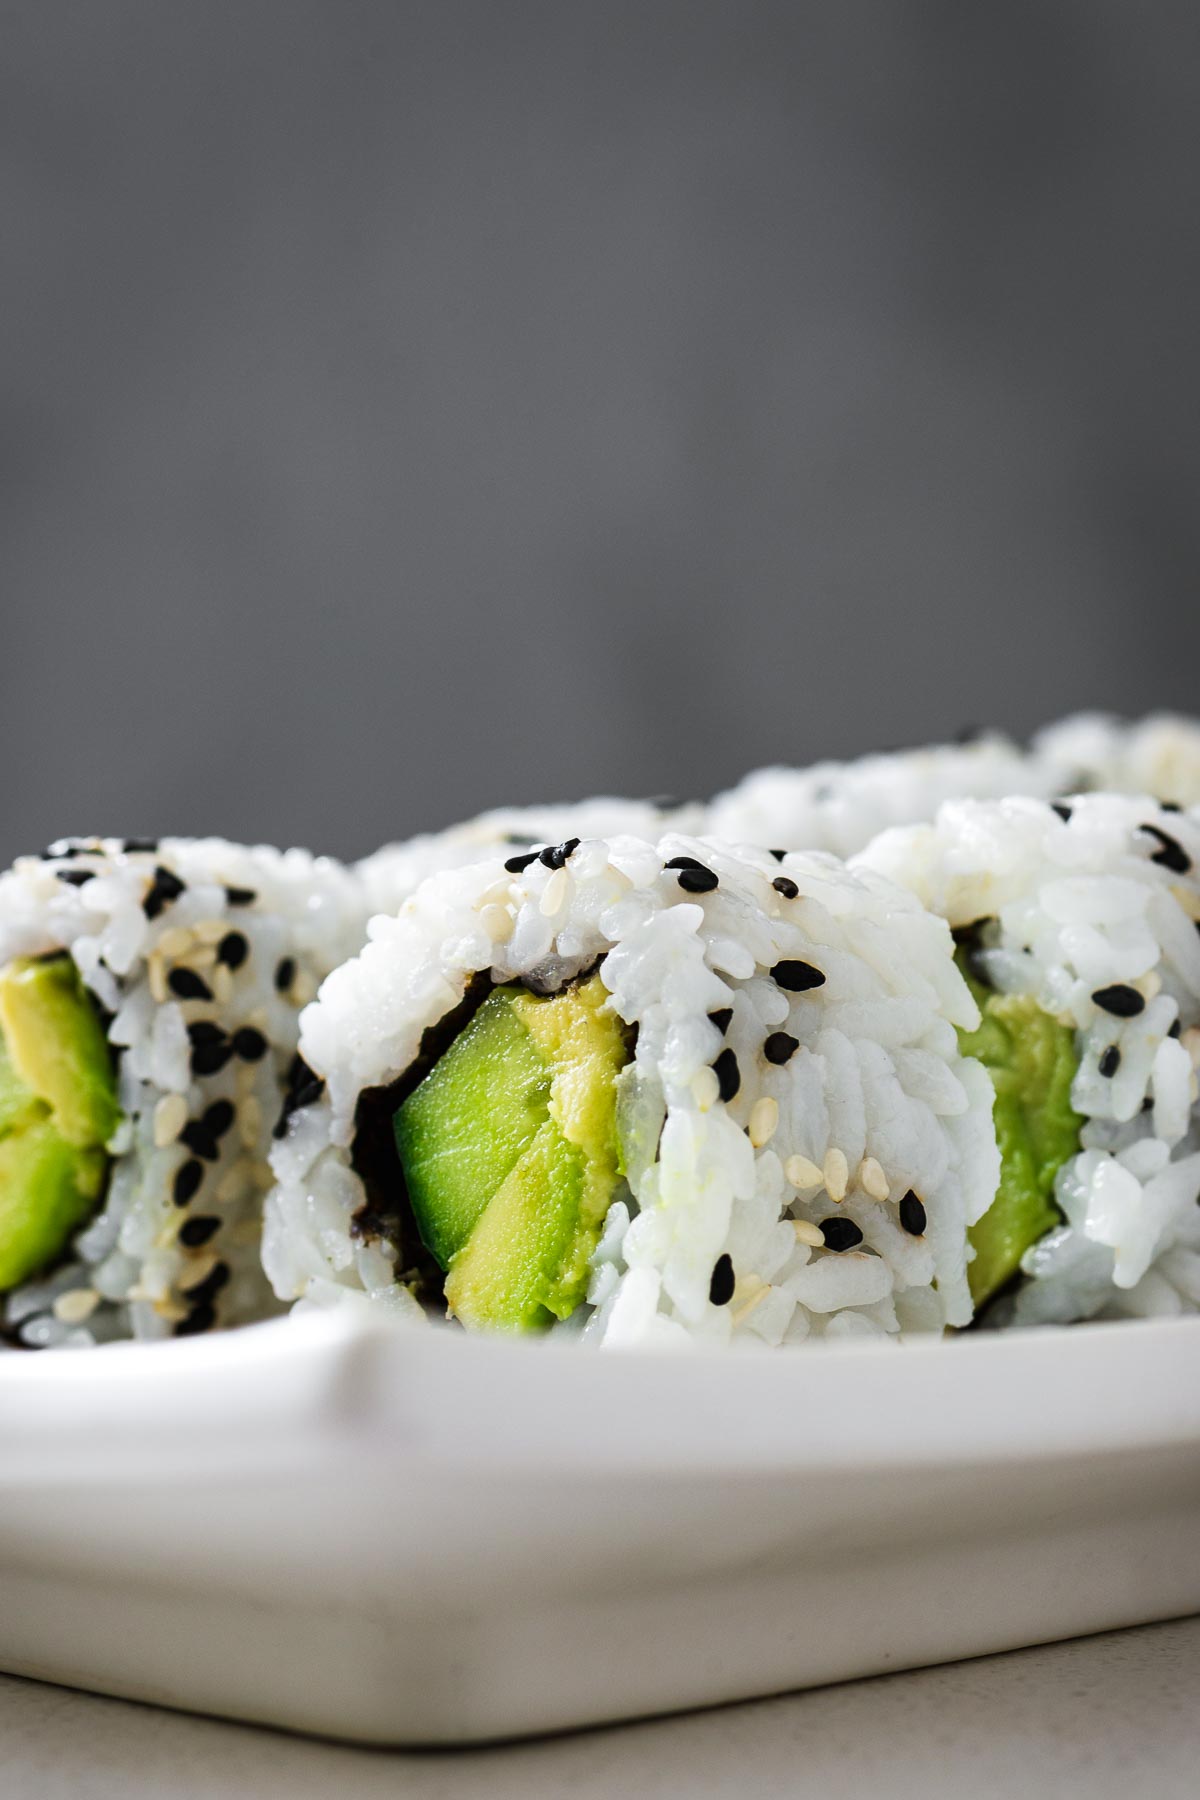 A close-up view of an uramaki sushi roll filled with avocado and cucumber, sprinkled with sesame seeds.